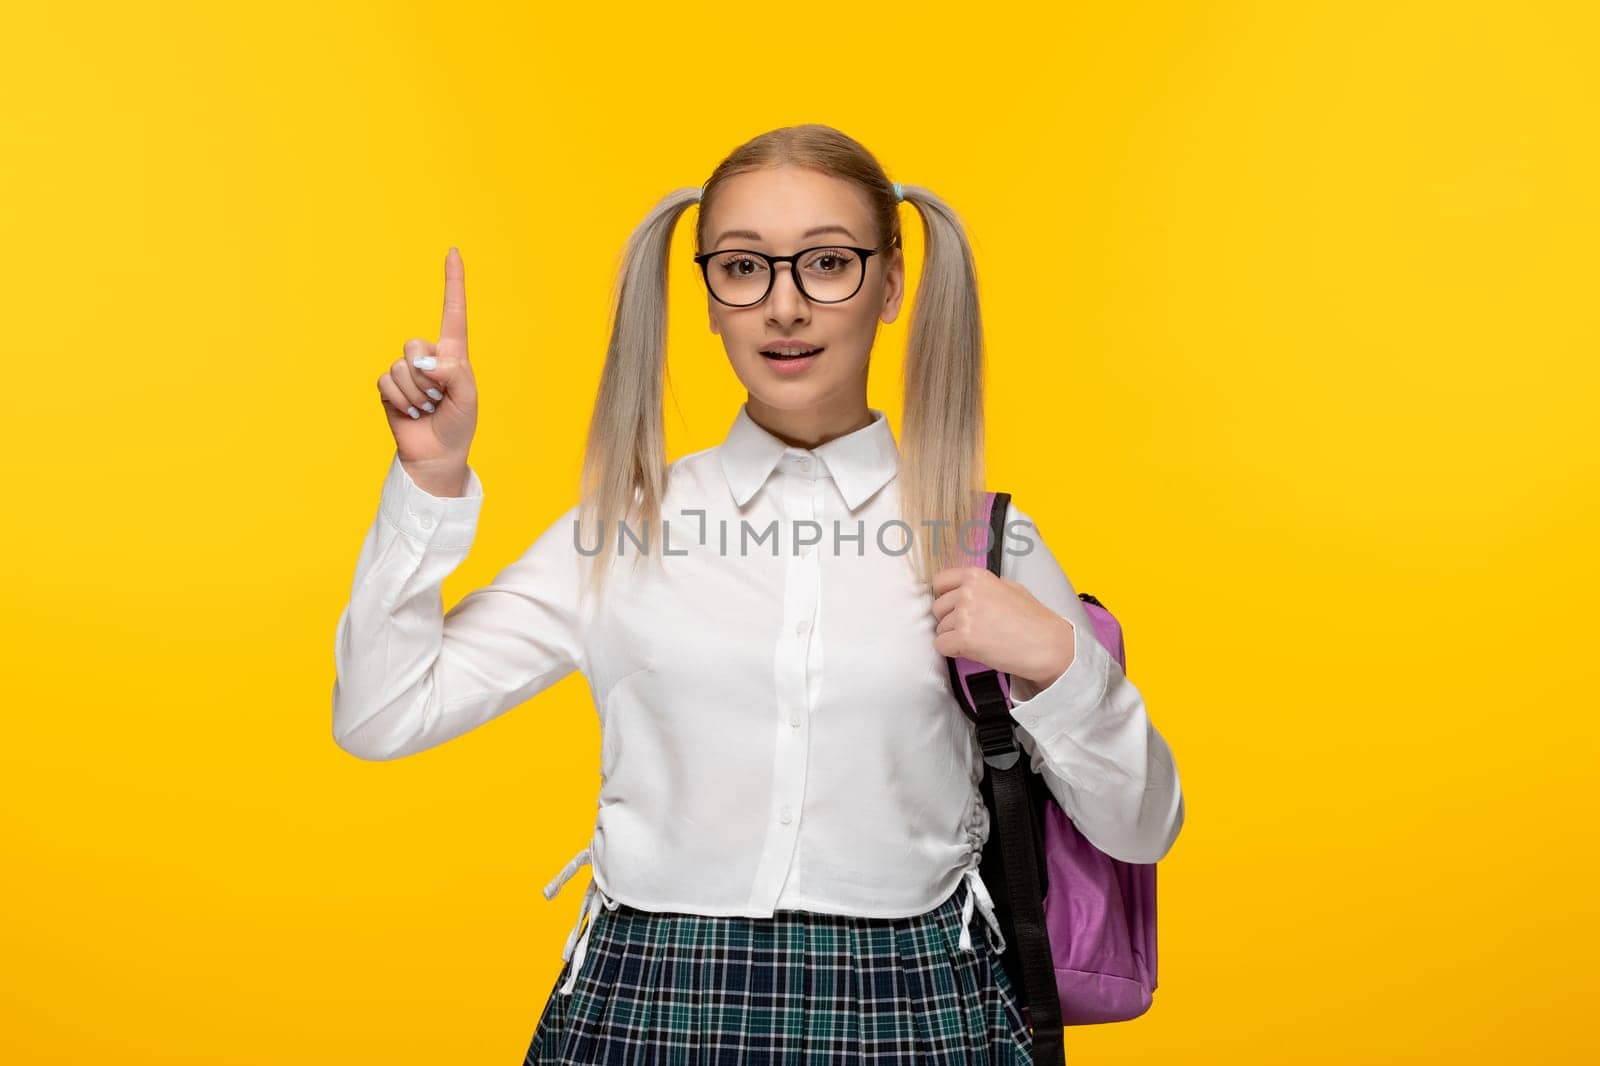 world book day blonde young girl with ponytails on yellow background by Kamran